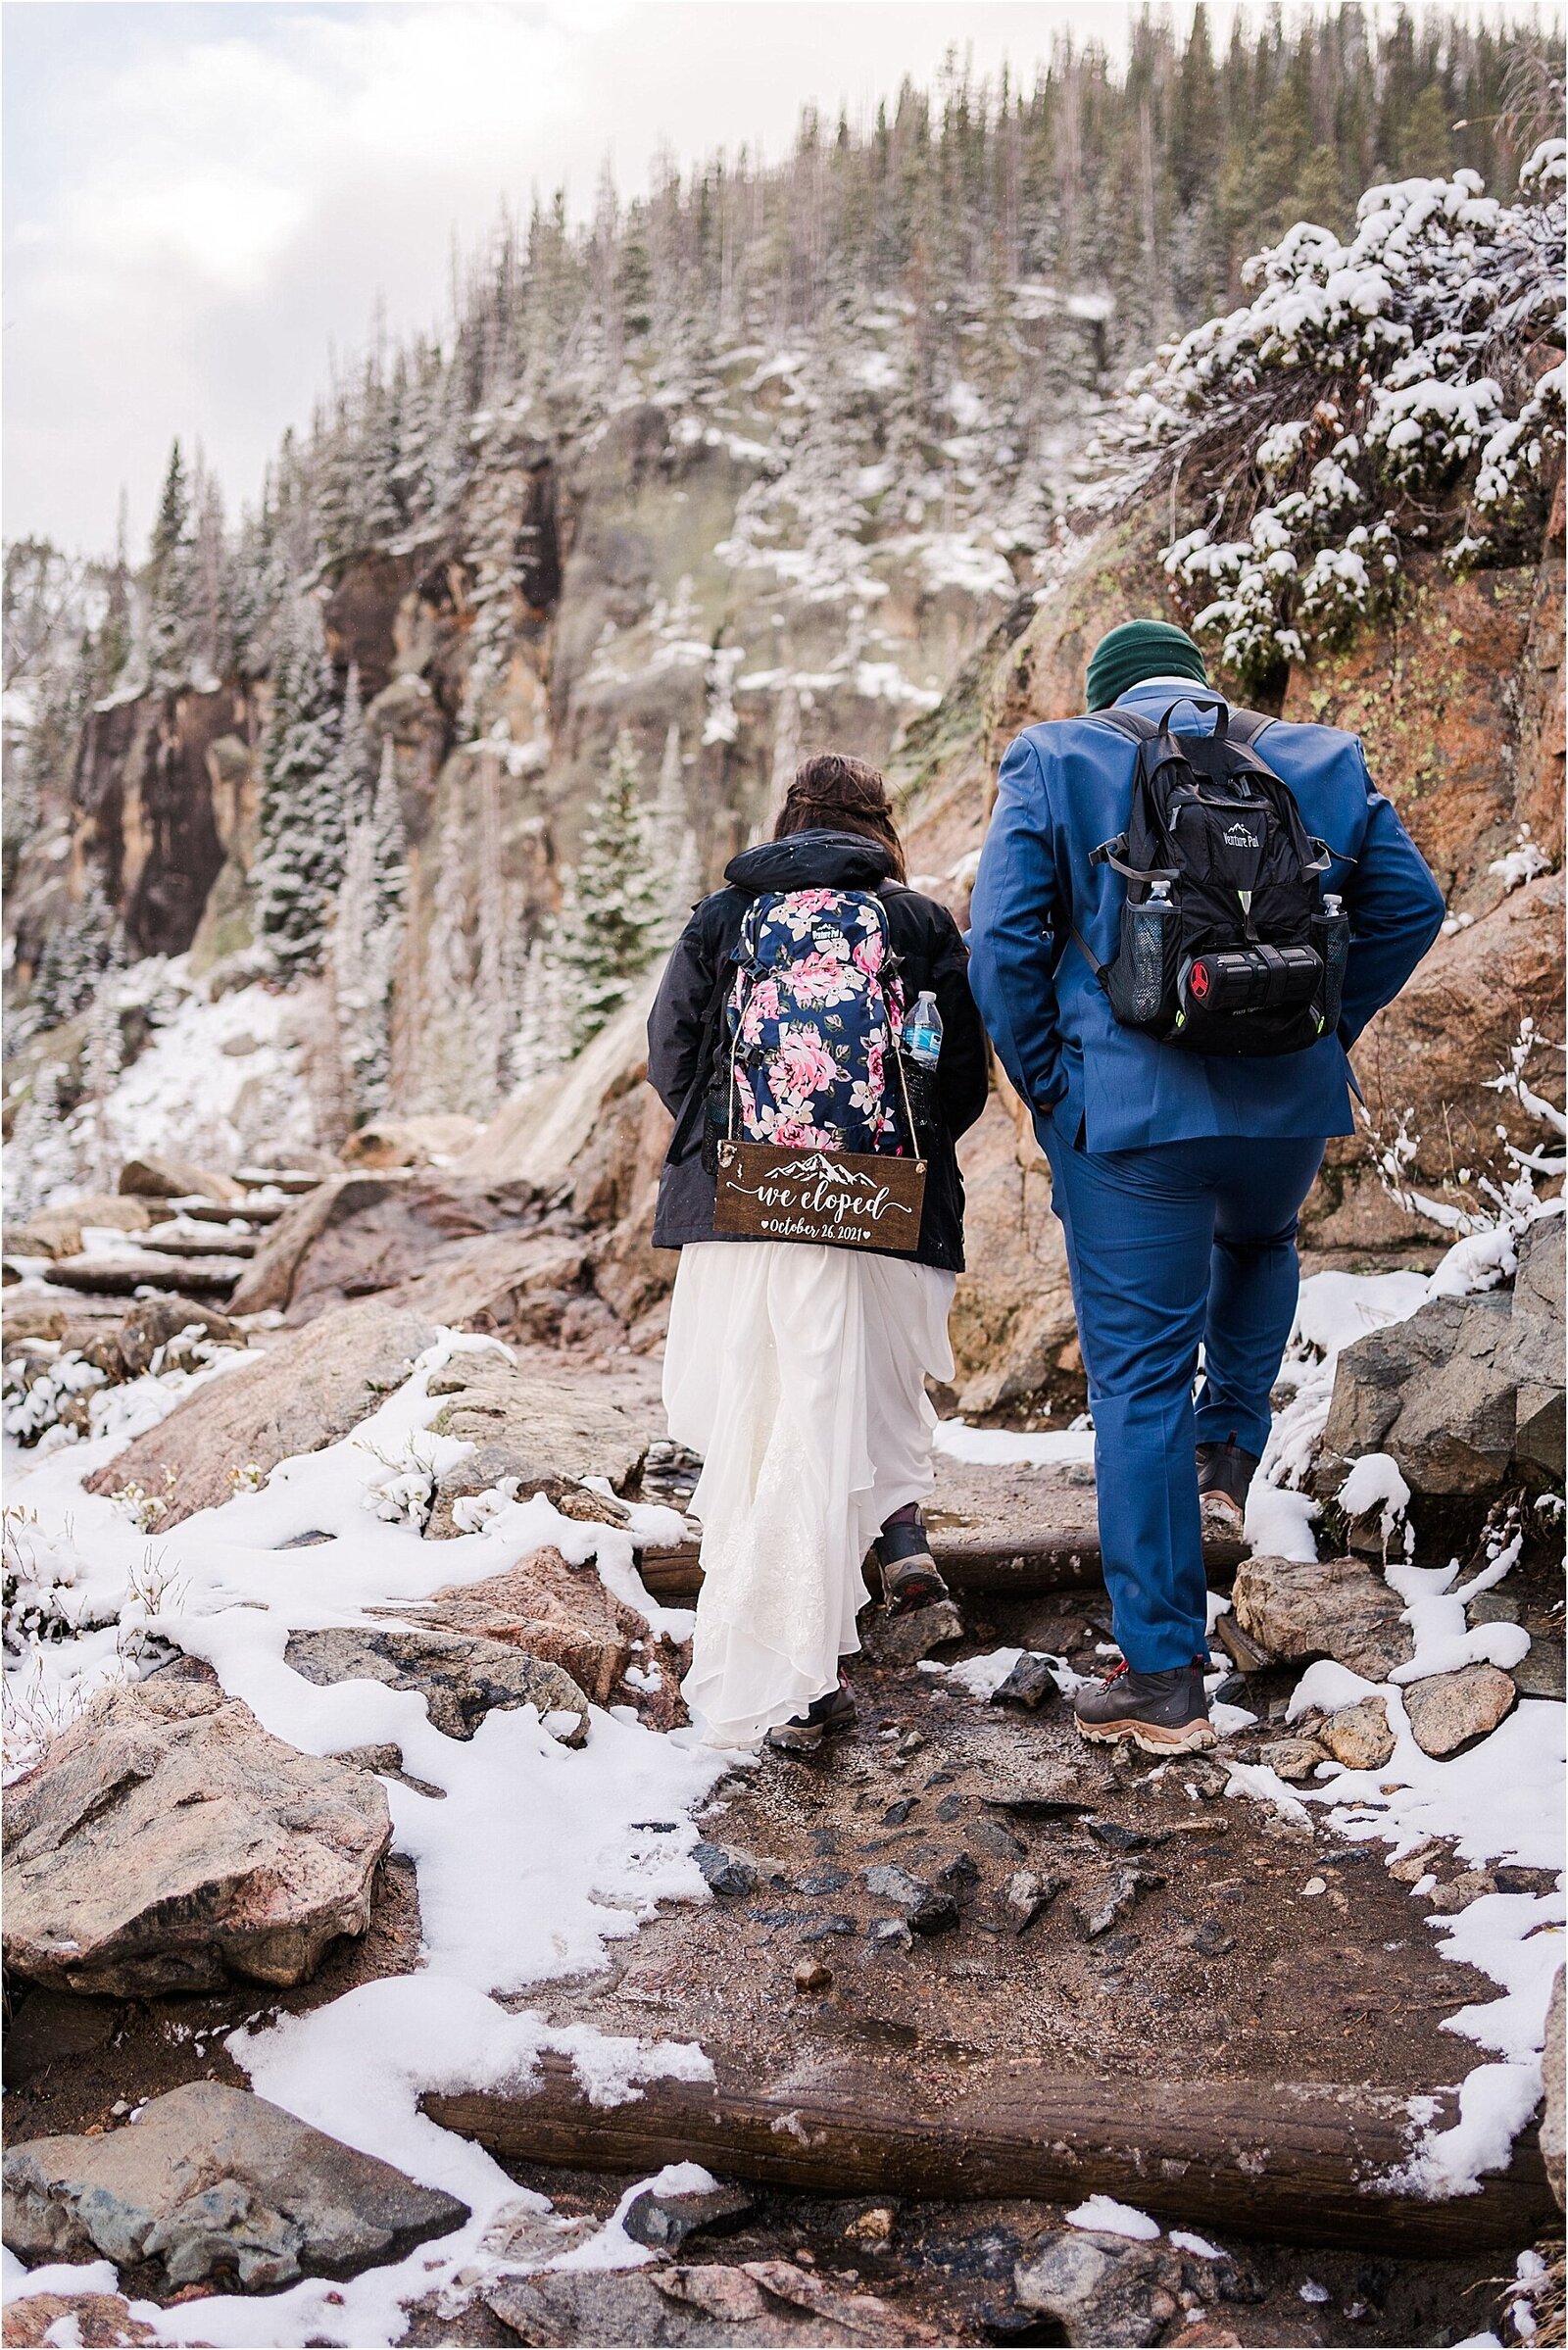 Say 'I Do' with a Scenic Elopement at a Waterfall, Captured Beautifully by Sam Immer Photography's Documentary-style Photography.